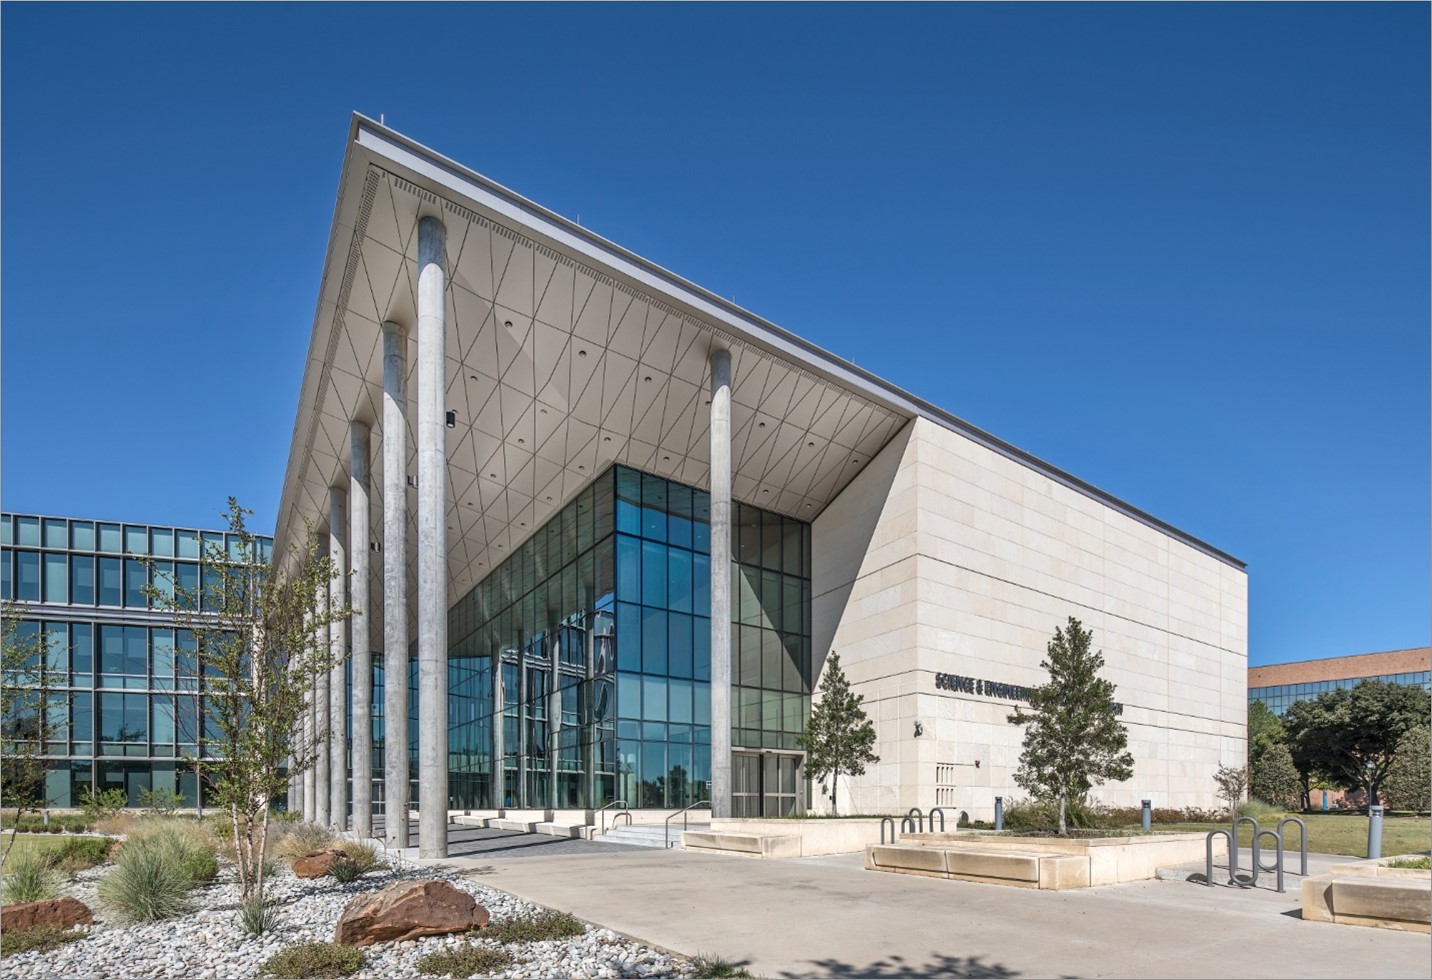 University of Texas at Arlington's Science & Engineering Innovation & Research Building